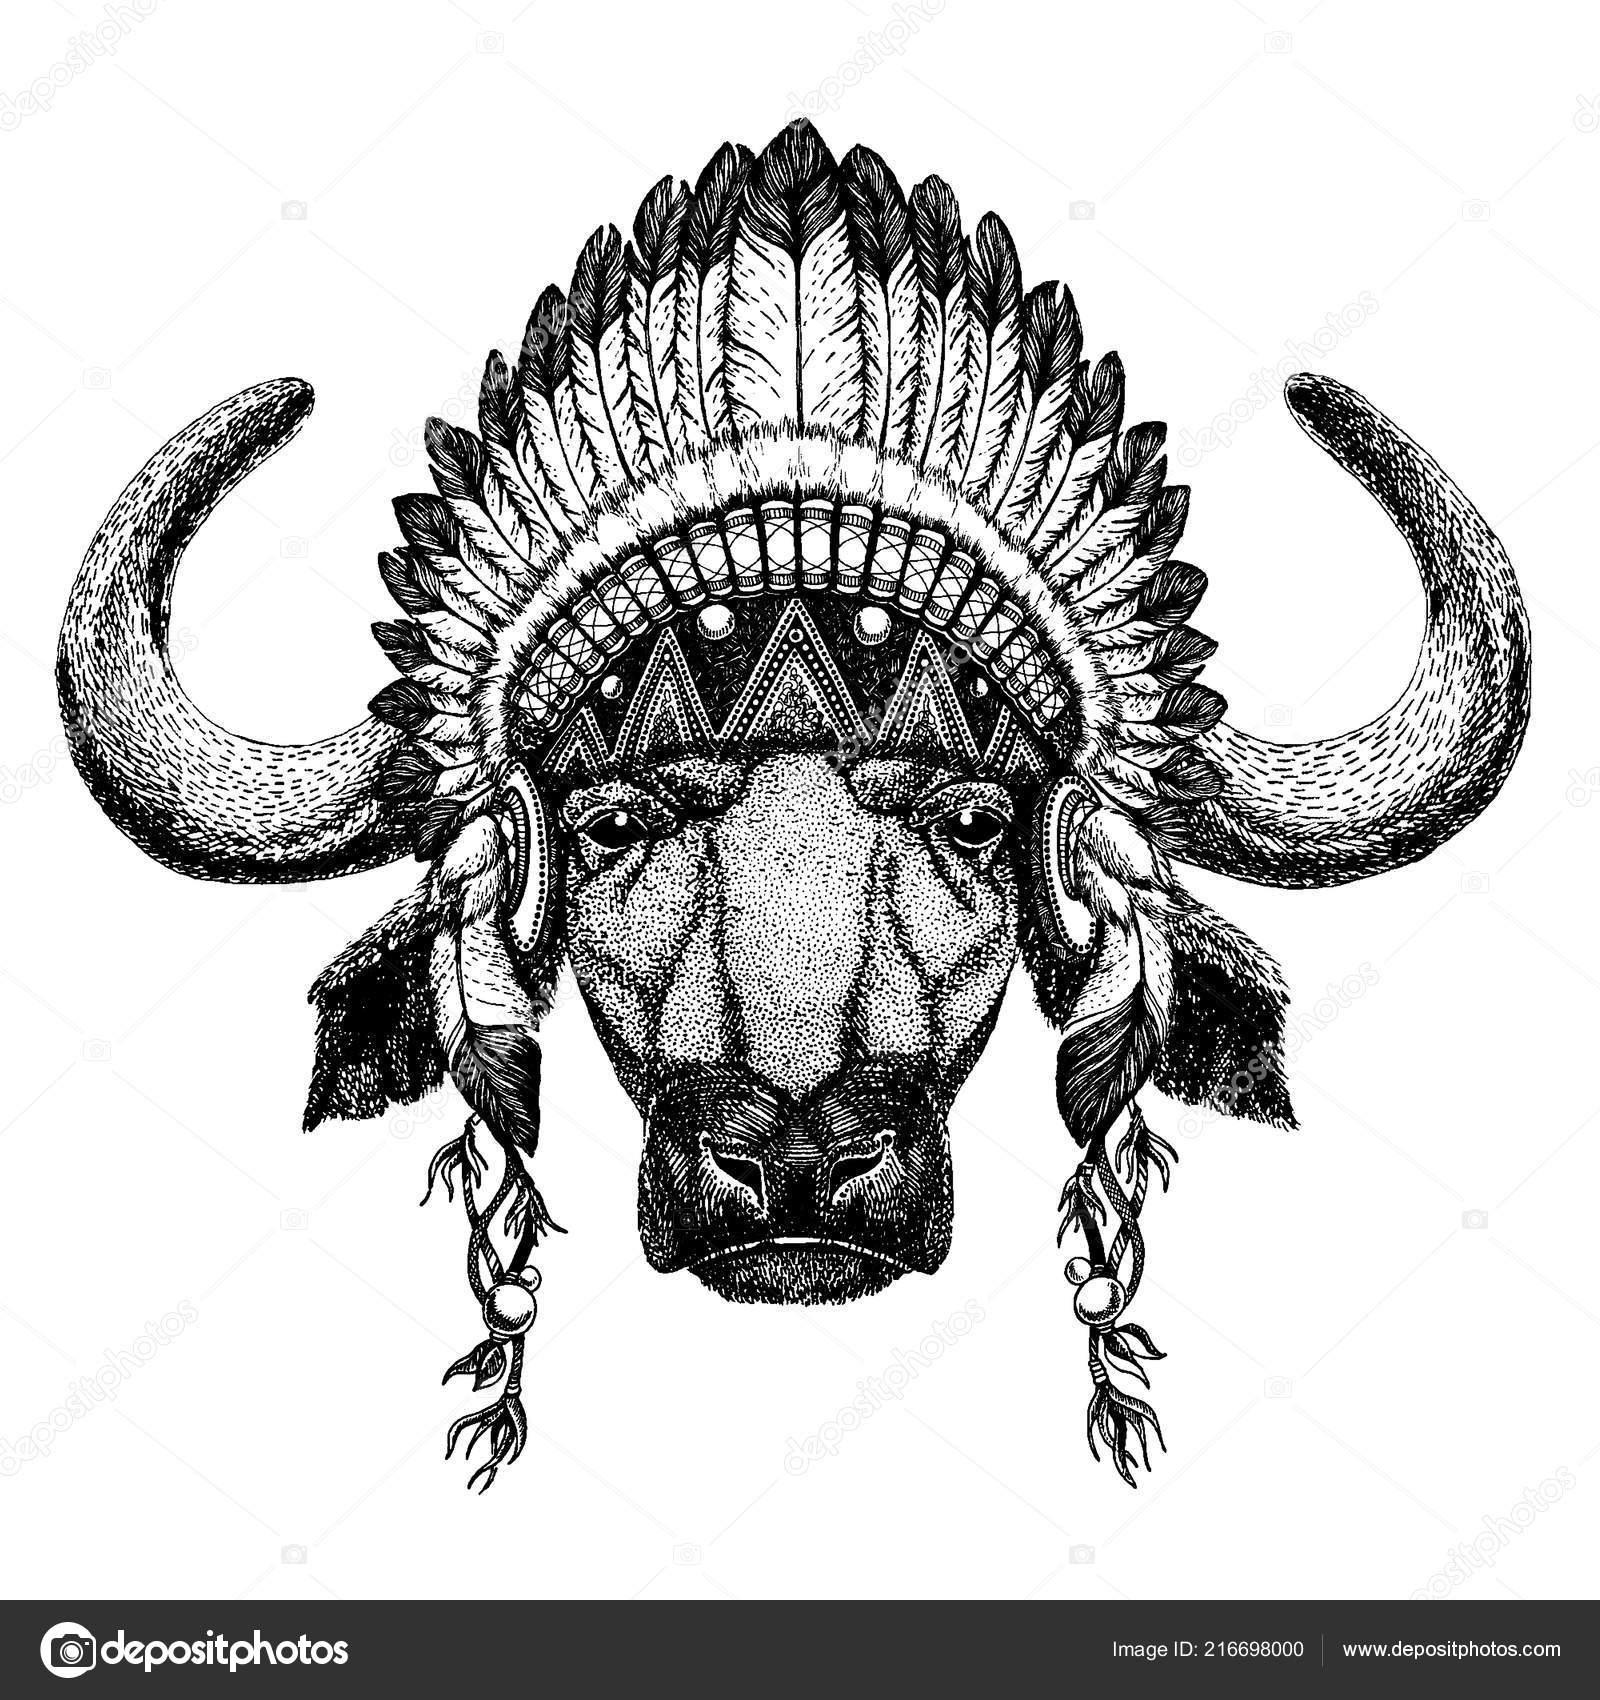 ox, Wild animal wearing inidan headdress with feathers. Boho chic style illustration for emblem, badge, logo, patch. Children clothing Stock Image by ©Helen_F #216698000